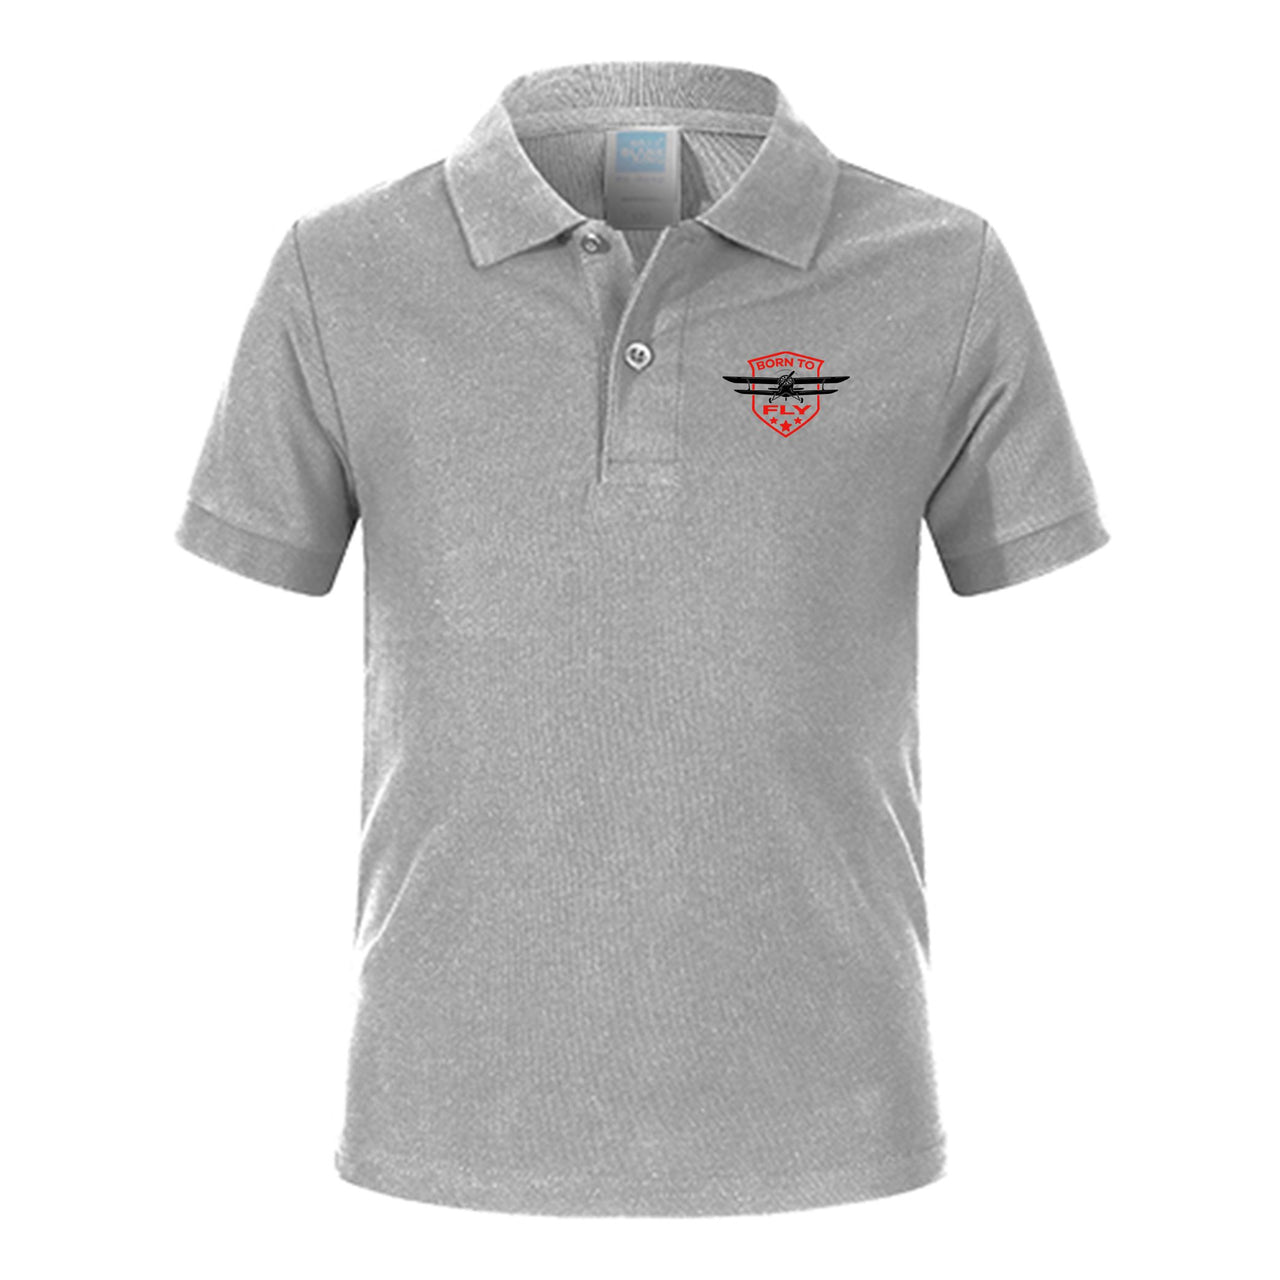 Born To Fly Designed Designed Children Polo T-Shirts